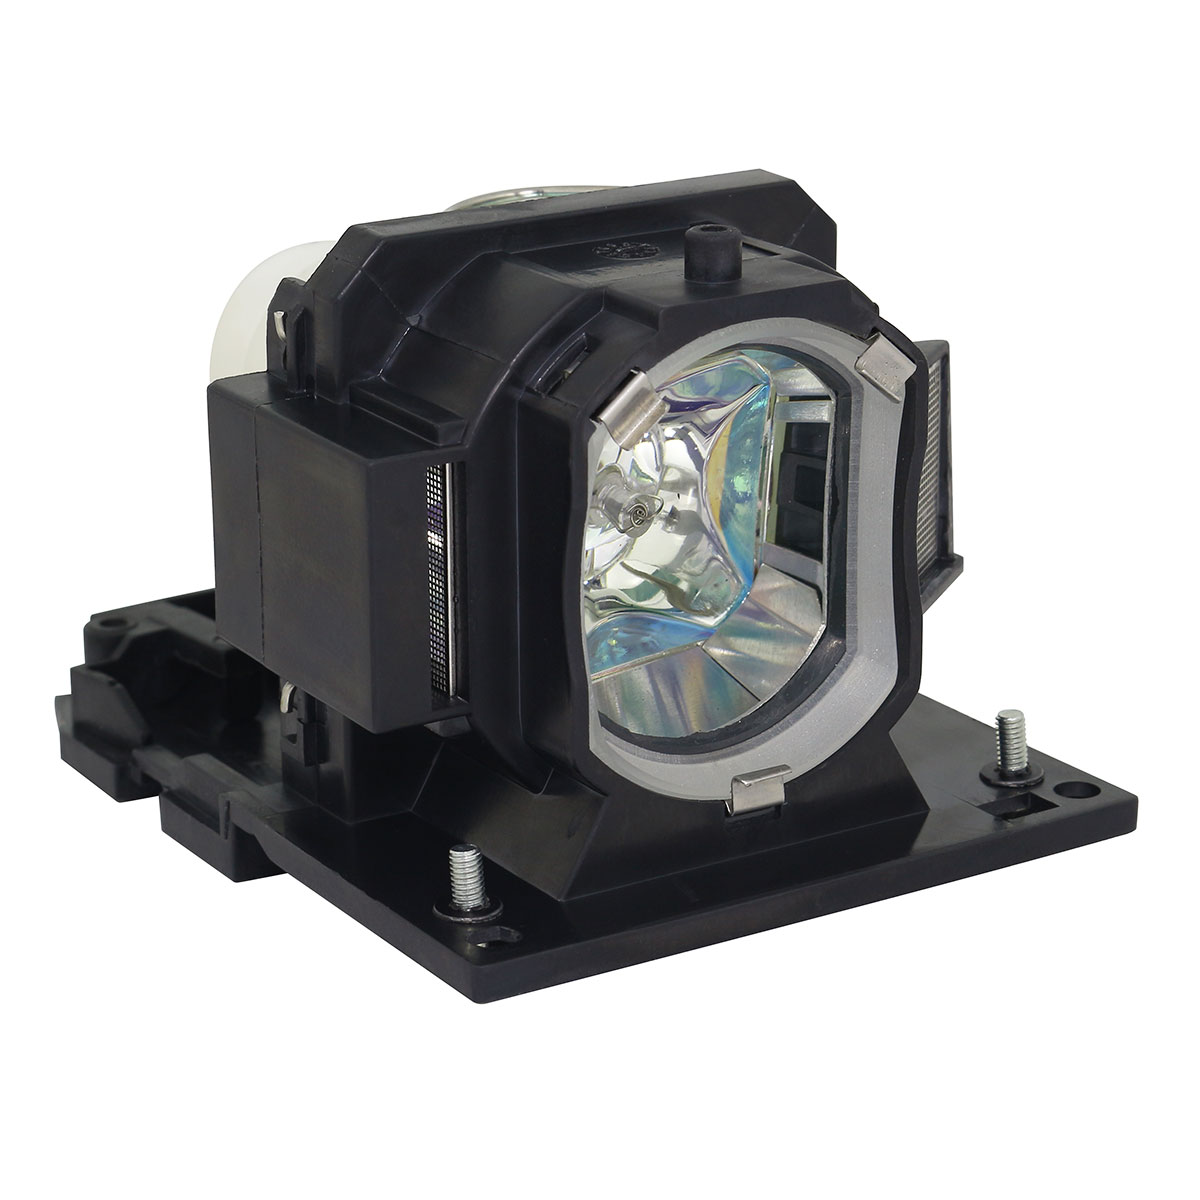 DT01491 Replacement Lamp & Housing for Hitachi Projectors - image 3 of 6